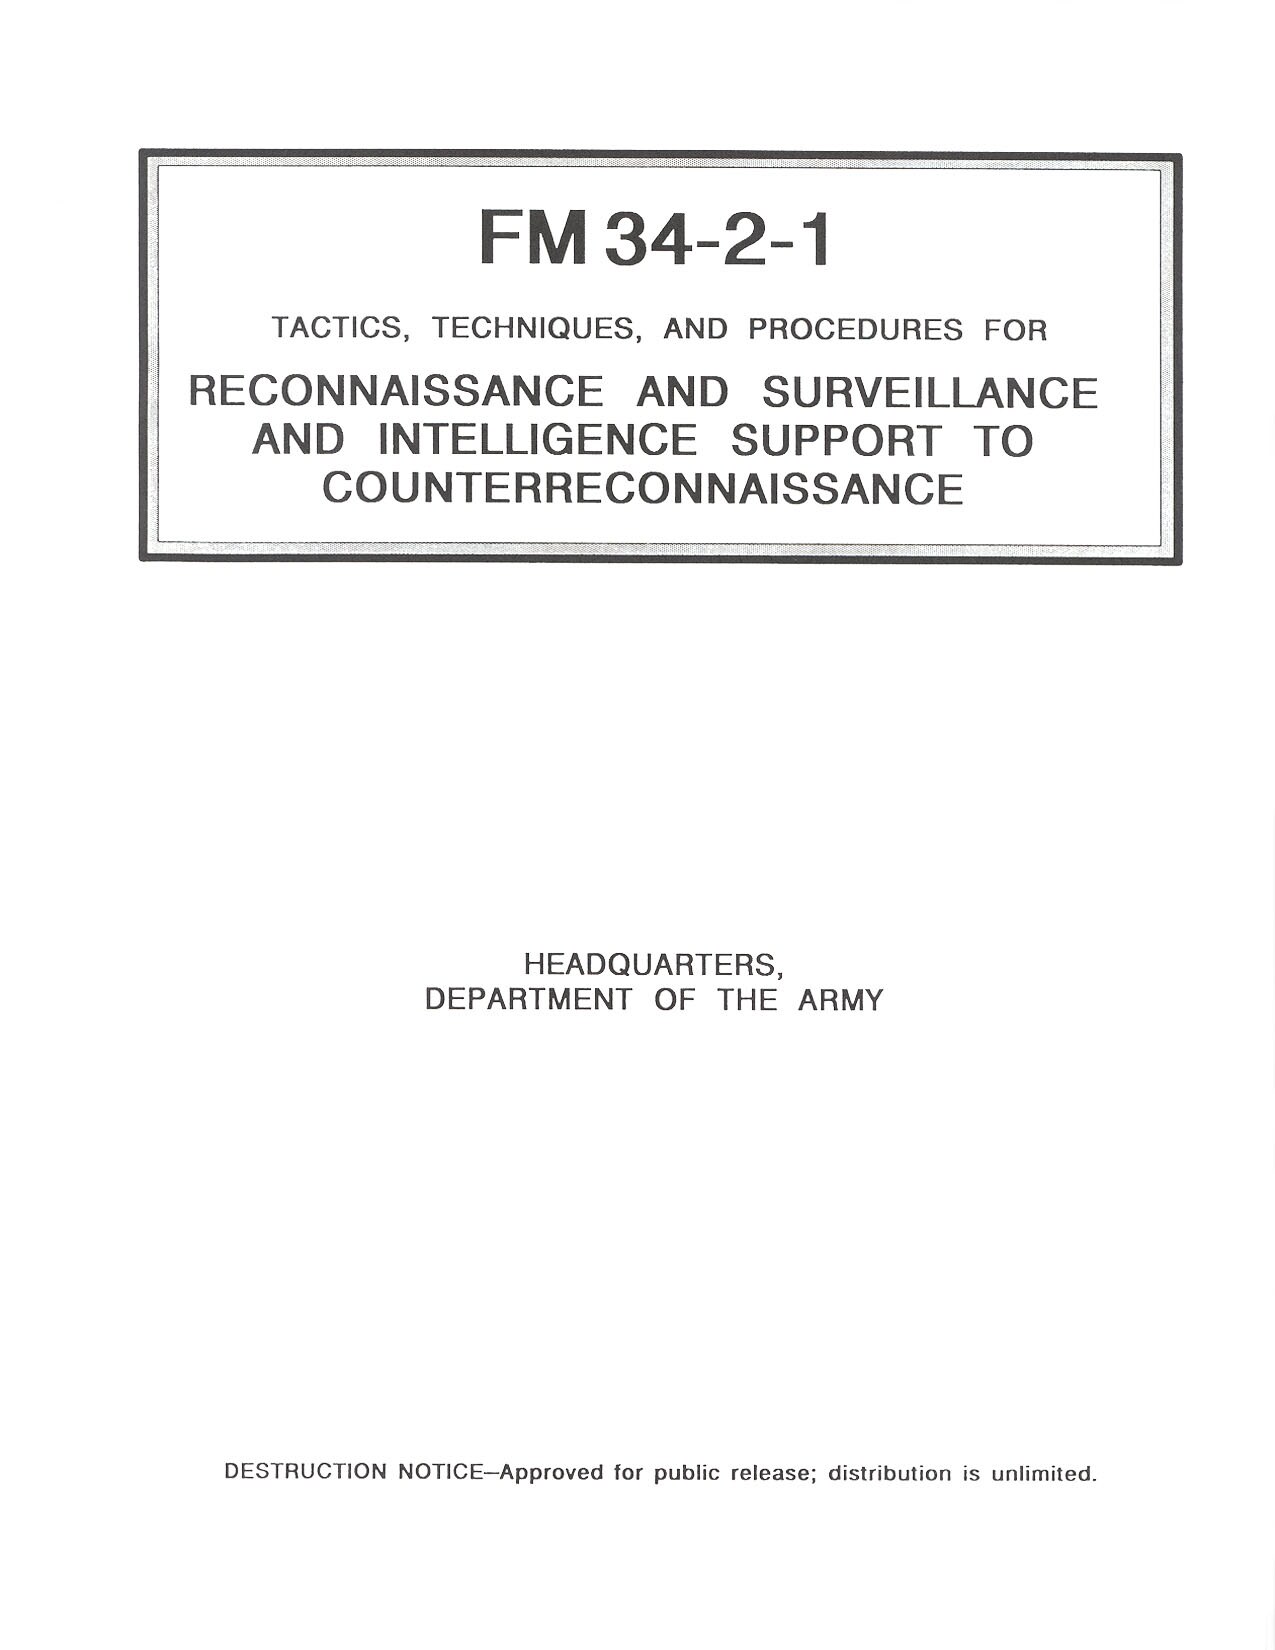 FM 34-2-1 Reconaissance and Surveillance and Intelligence Support to Counterreconaissance